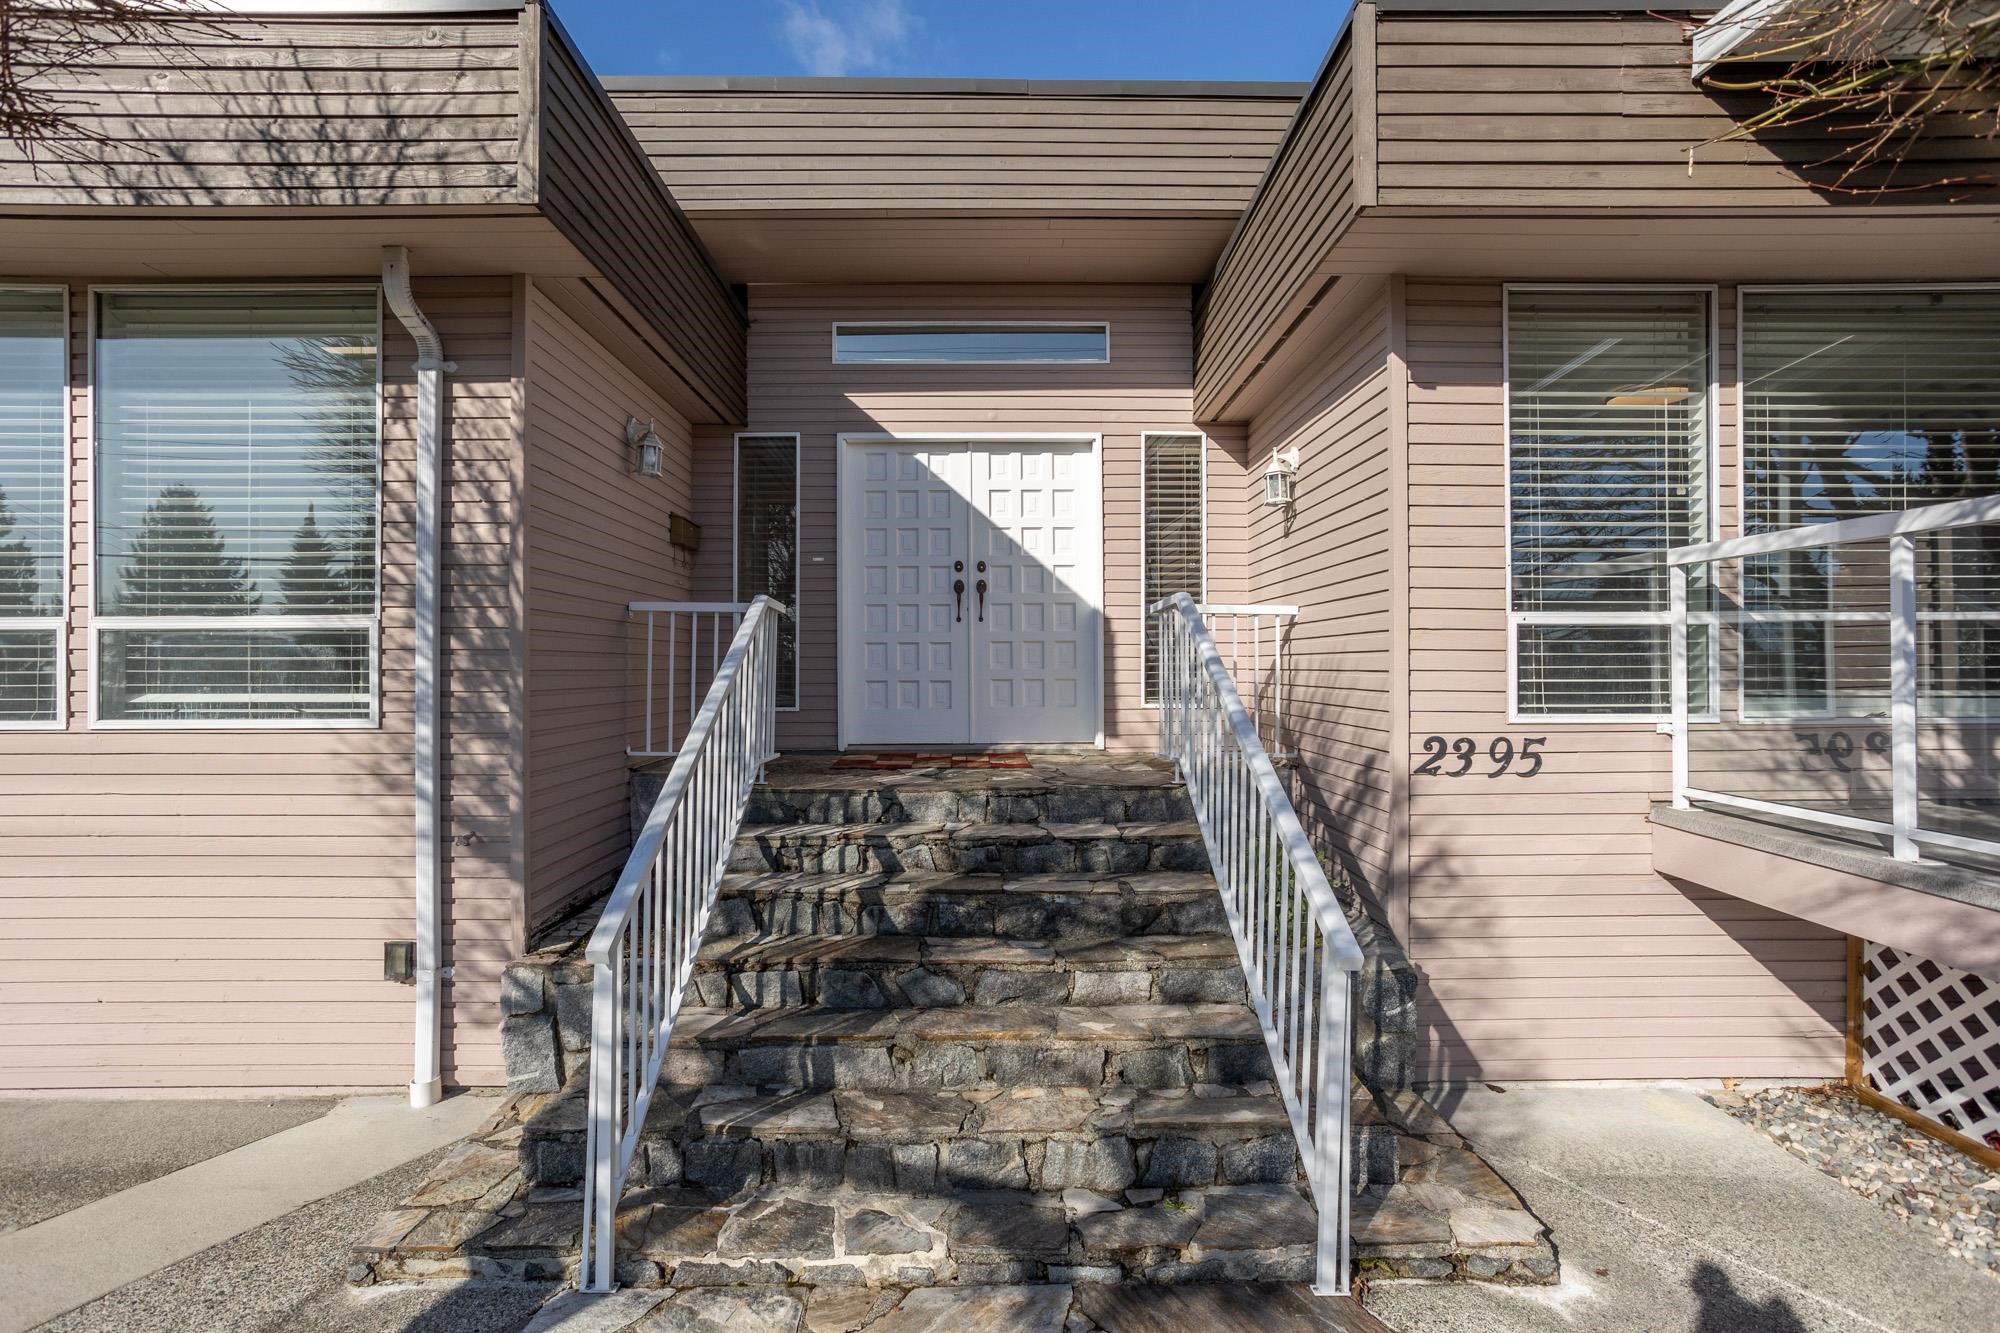 Listing image of 2395 MATHERS AVENUE